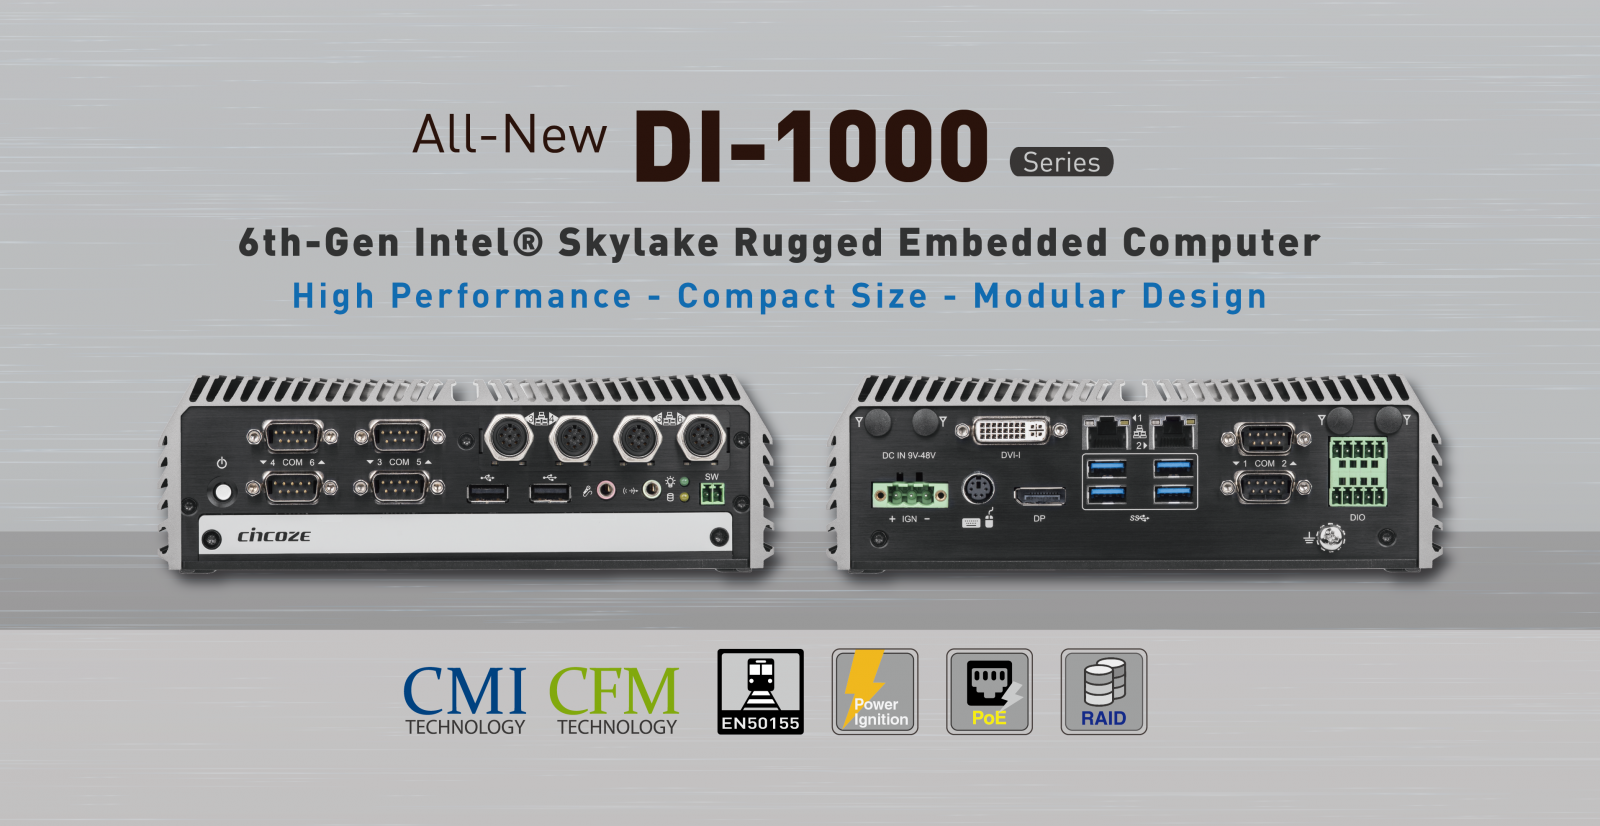 Cincoze DI-1000 Series Contributes High Performance, Compact Size and Modular Design to the World